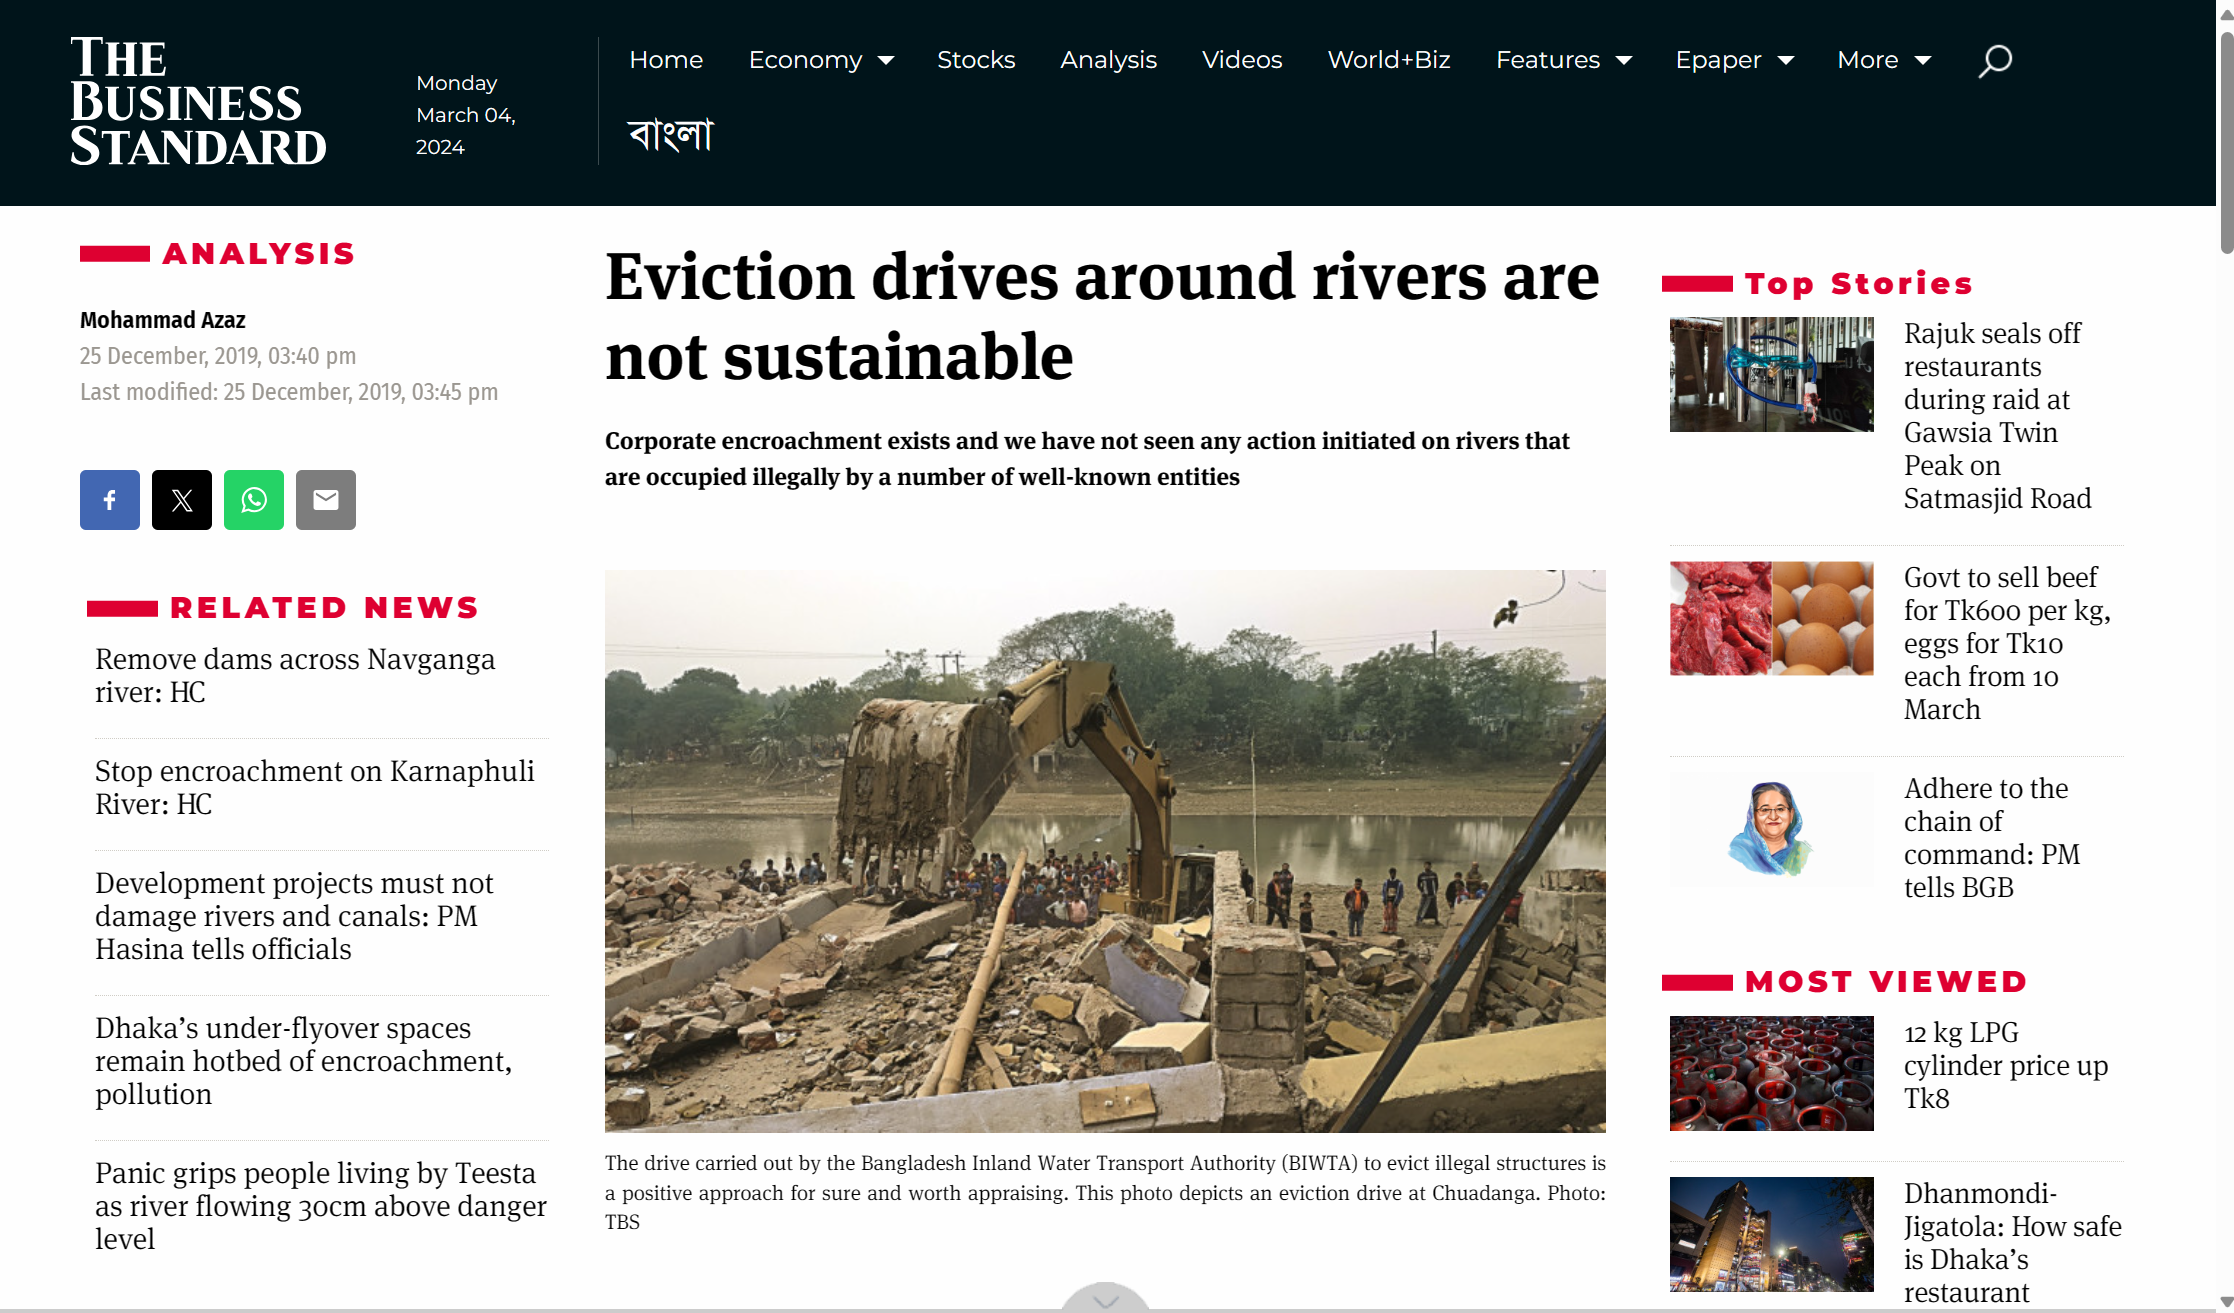 Eviction drives around rivers are not sustainable.